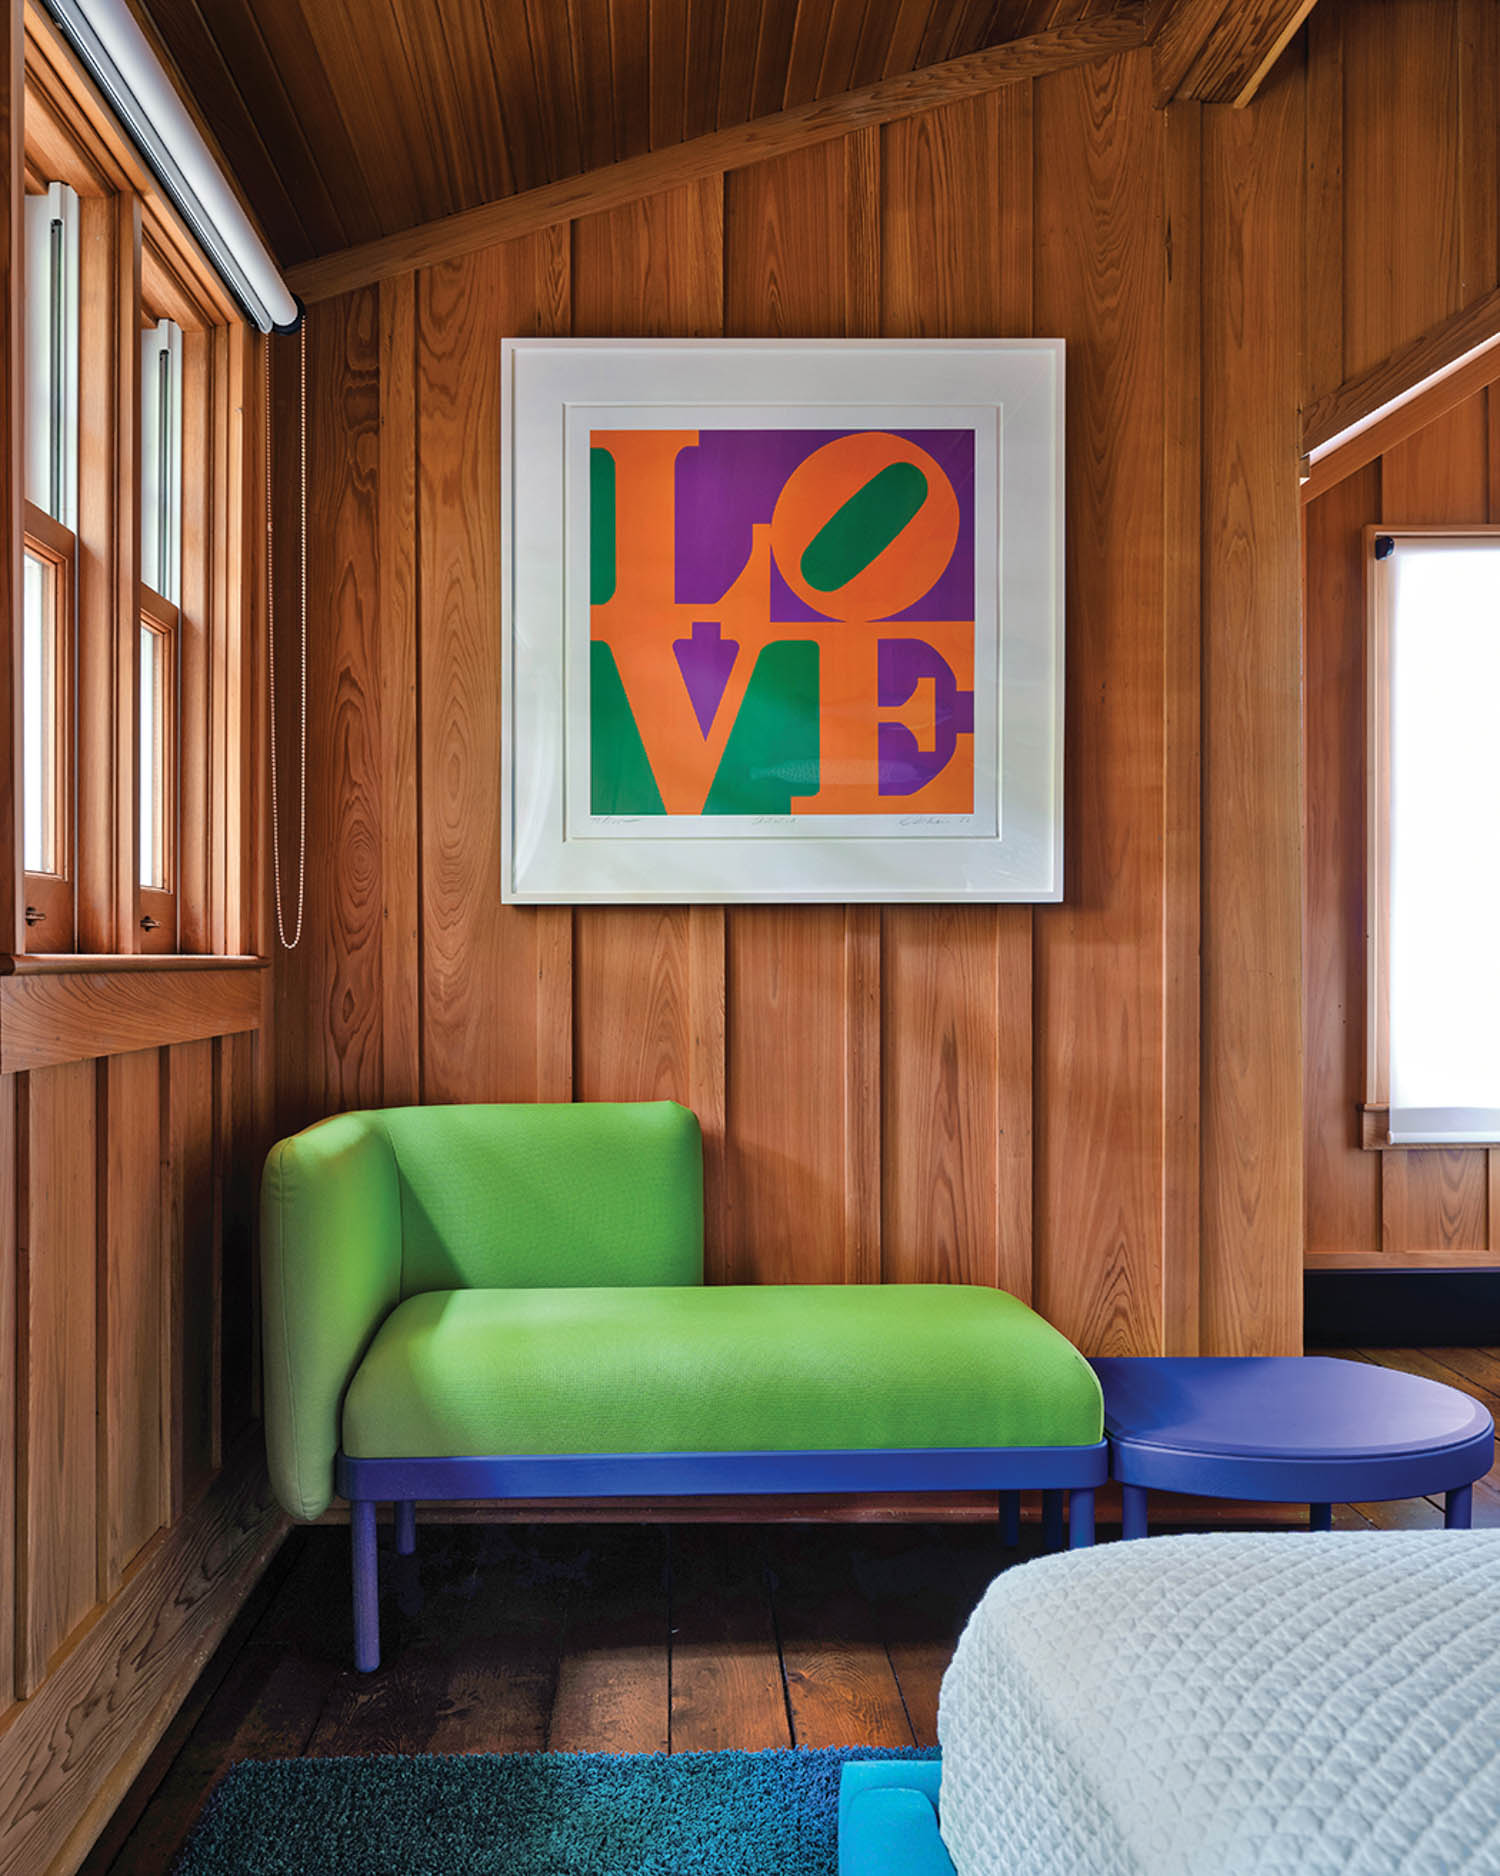 A Robert Indiana "Love" print on the wall above a green sculptural seat